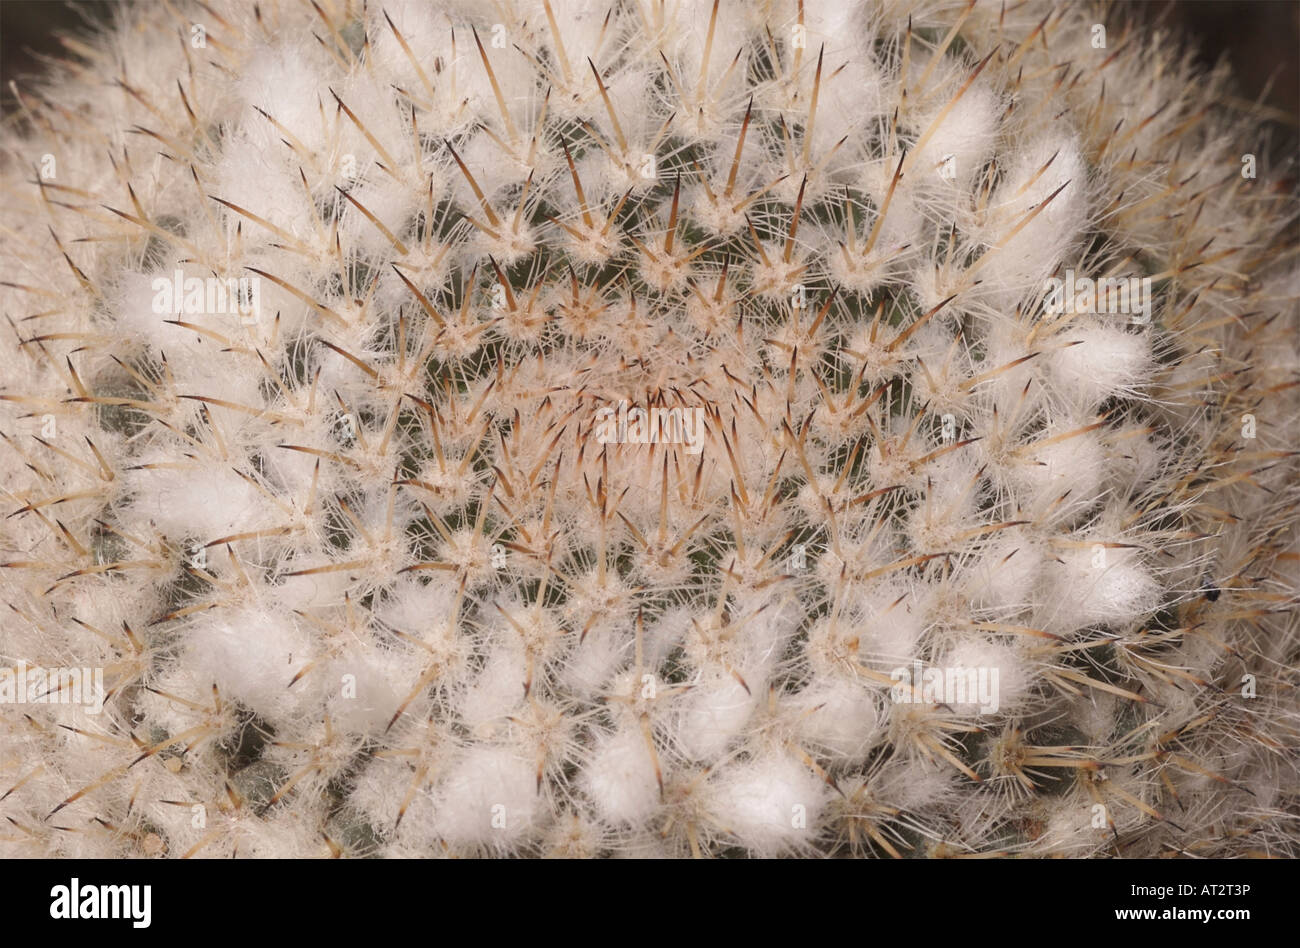 Mammillaria standleyi, a cactus native to Northwest Mexico, uses white hairy fibers to shade itself from too much sun. Stock Photo